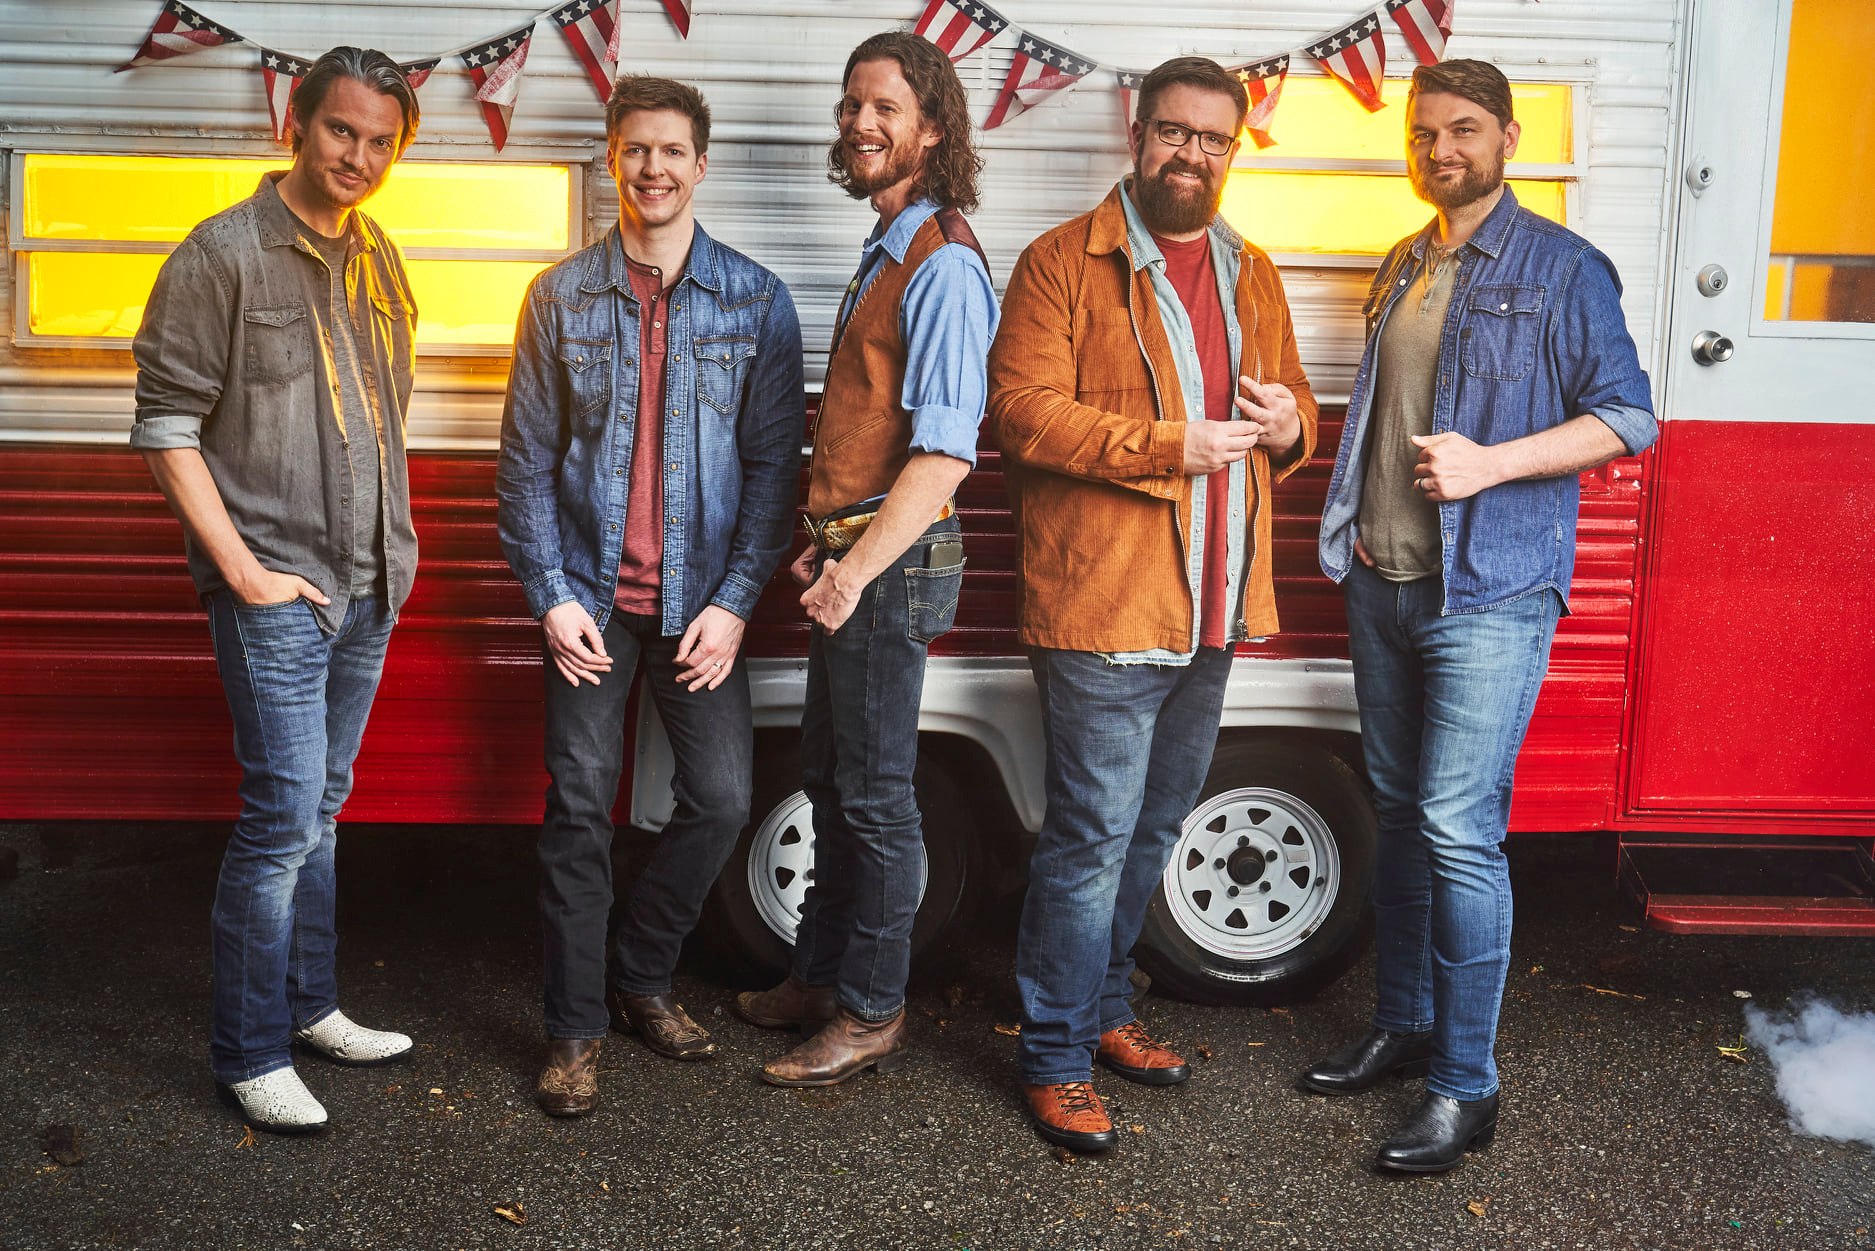 Home Free Vocal Band at Home Free Tickets